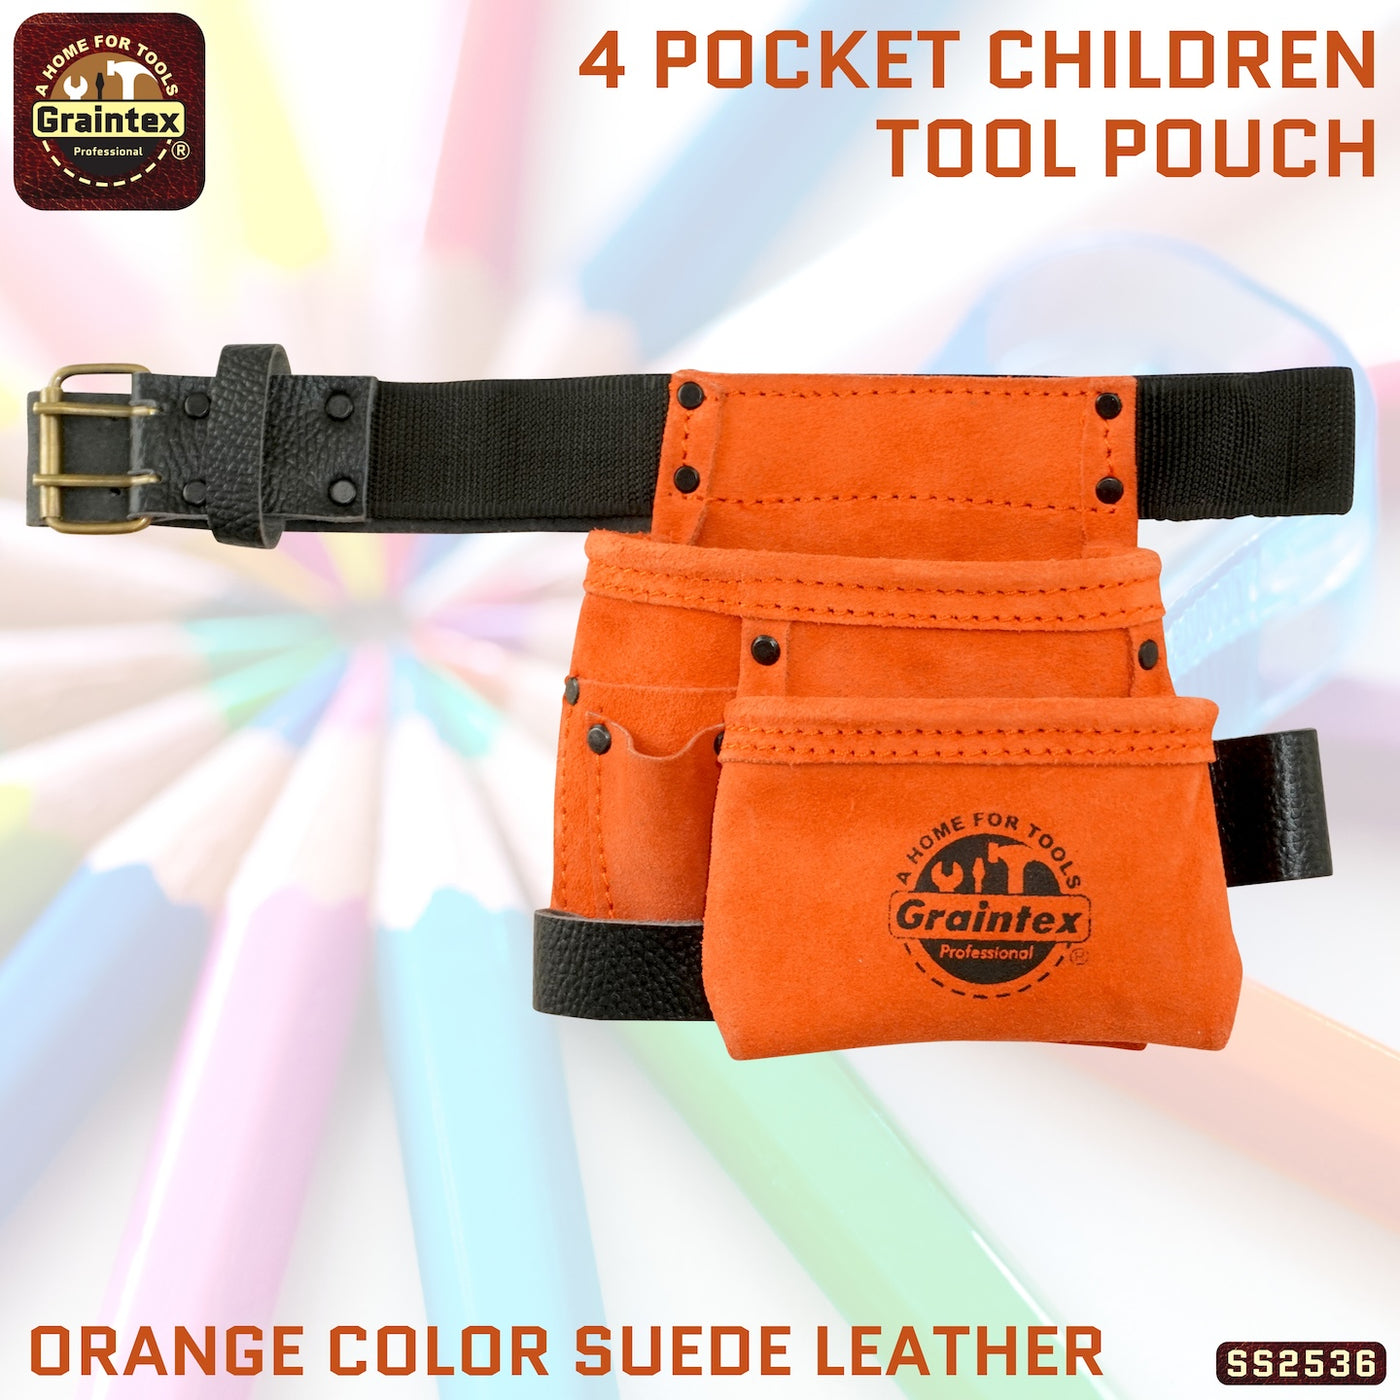 SS2536 :: 4 Pocket Children Tool Pouch Orange Color Suede Leather